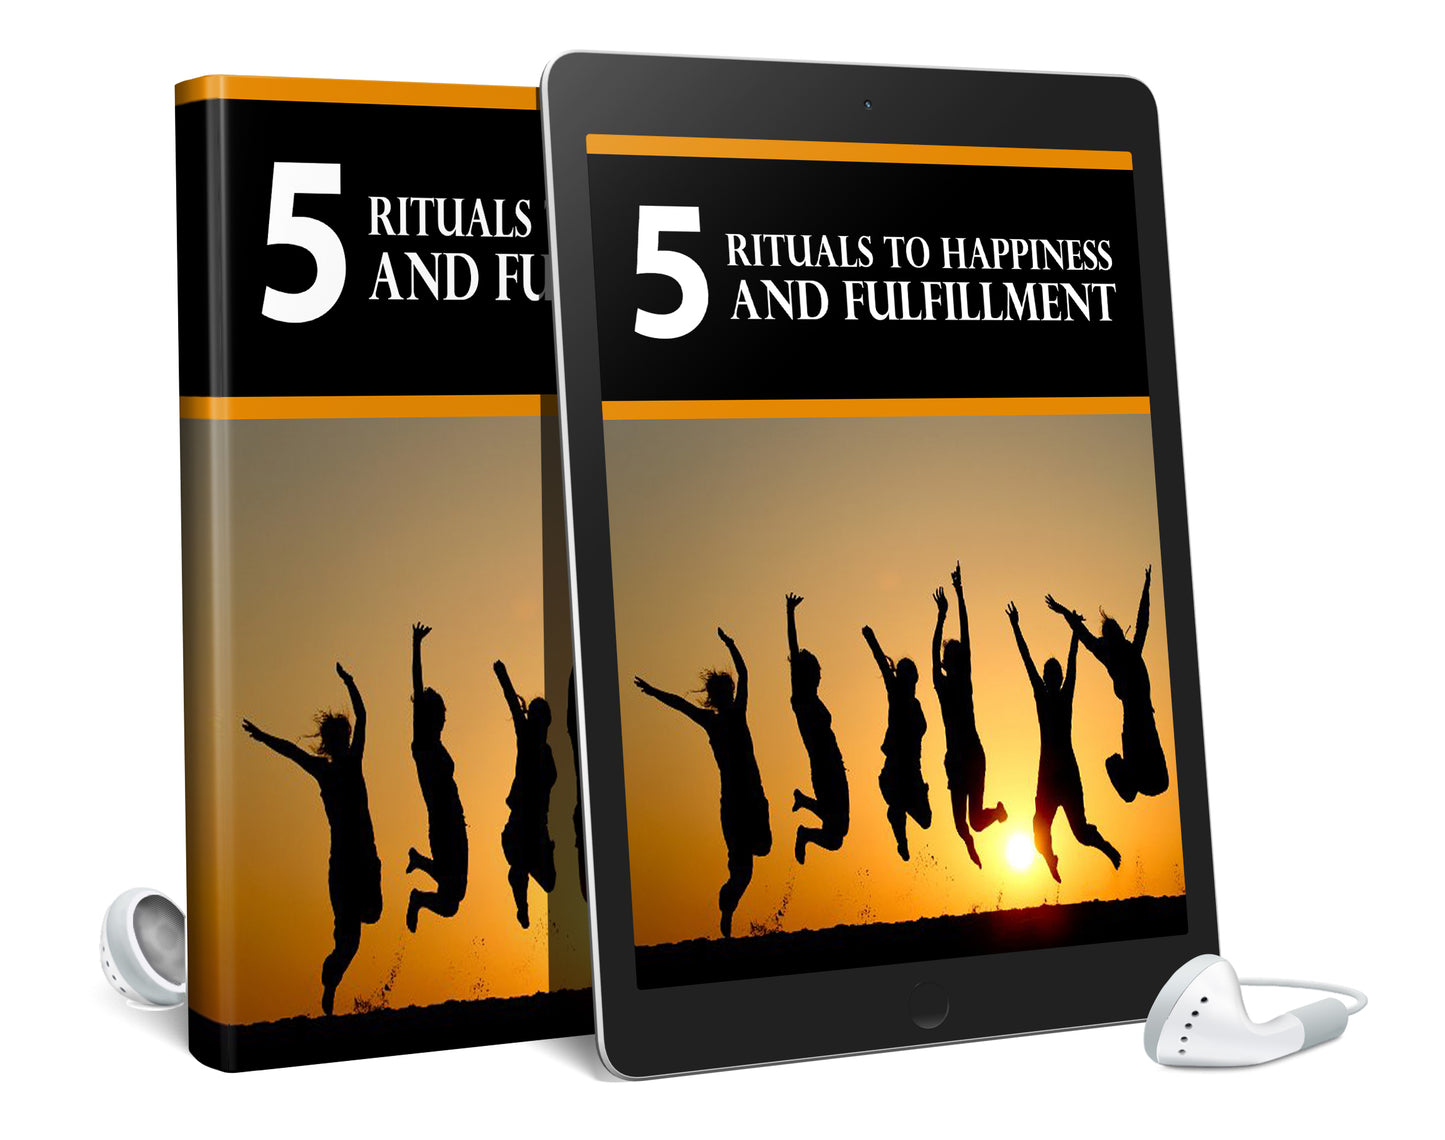 5 Rituals to Happiness and Fulfilment (Audio Book & Ebook)